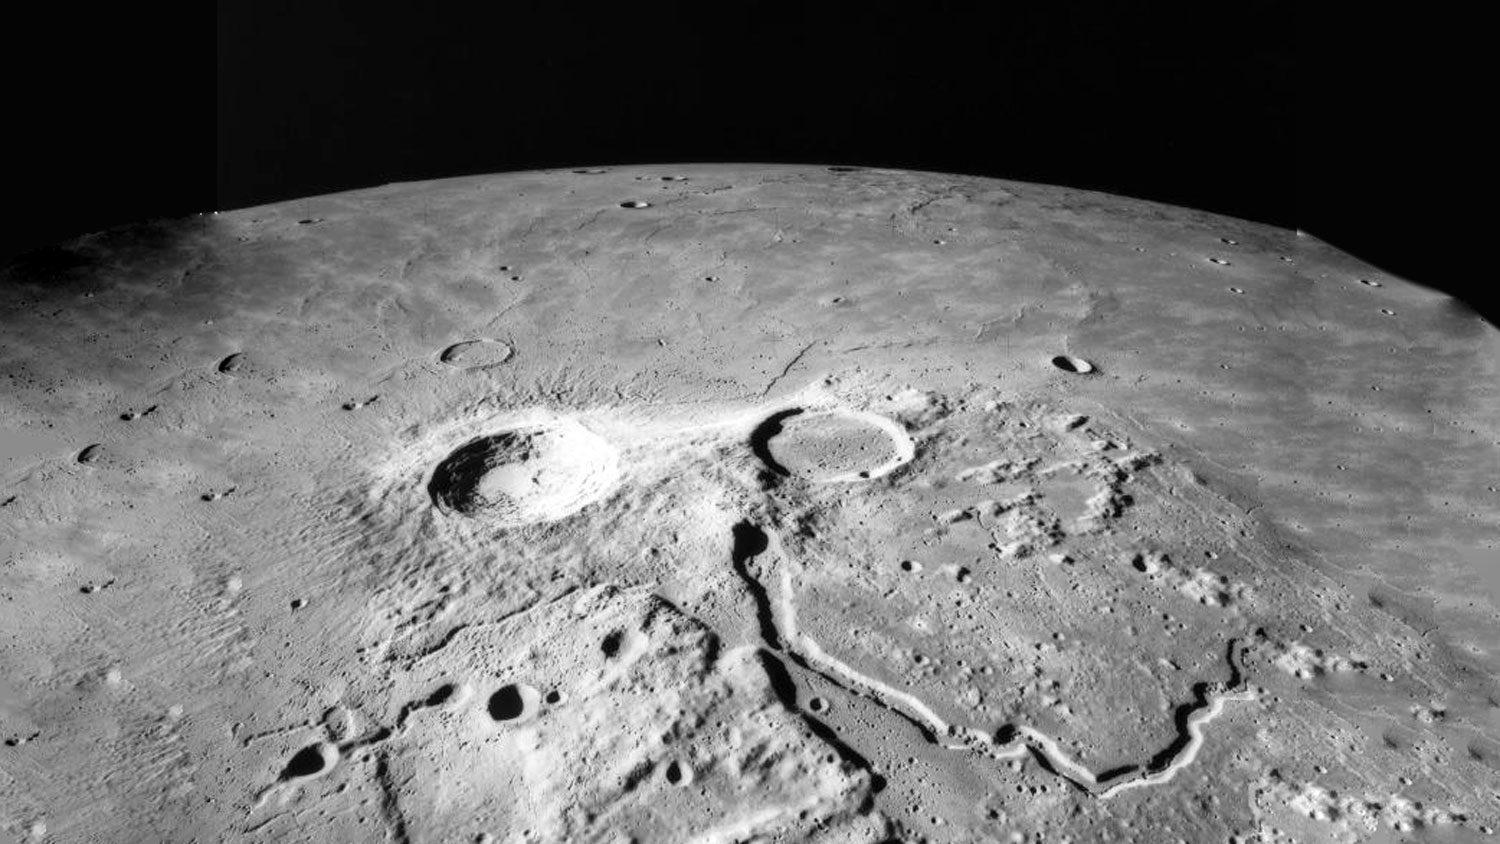 Ancient moon volcanoes may one day provide astronauts with drinkable water - Tech Explorist